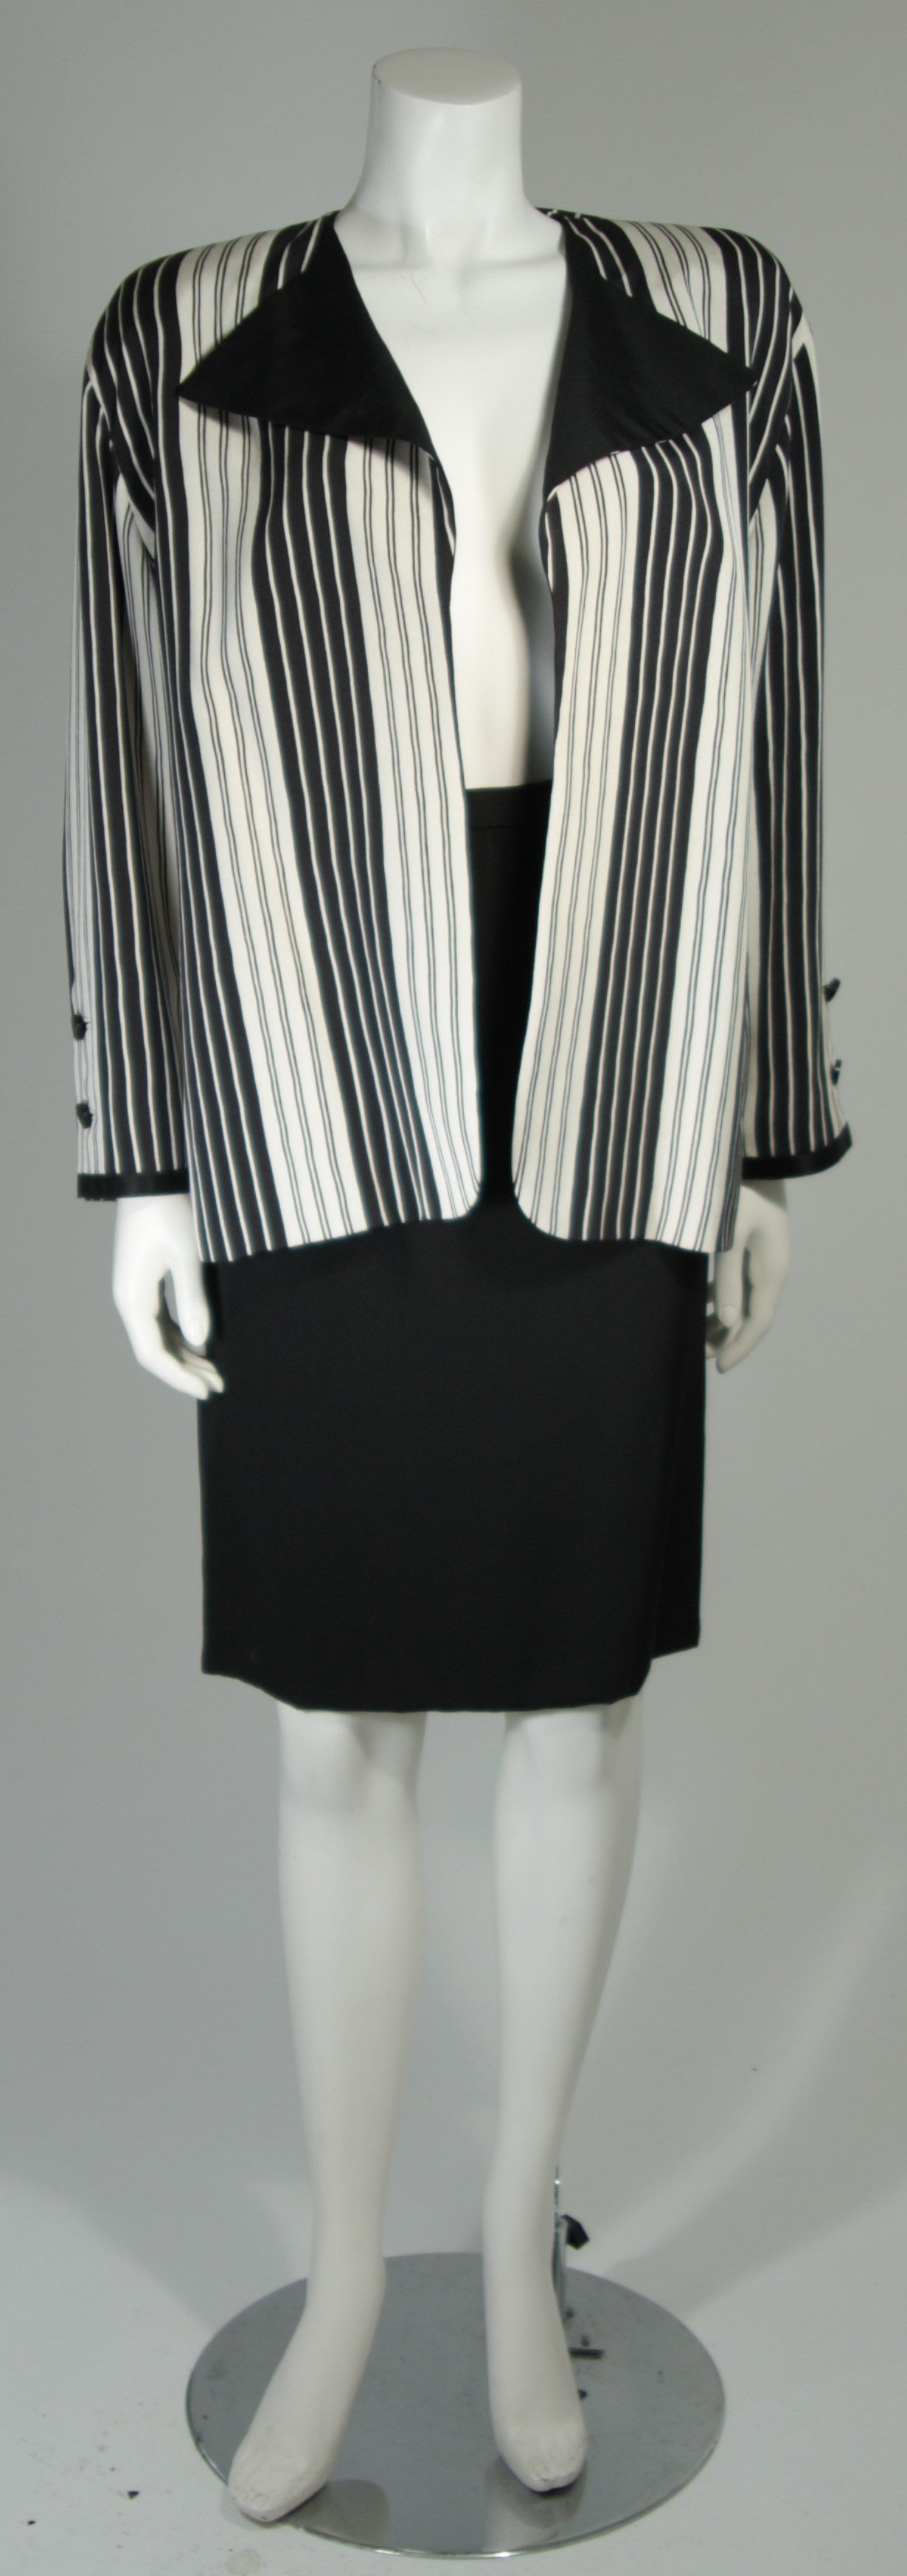 This Galanos Couture design is available for viewing at our Beverly Hills Boutique. We offer a large selection of evening gowns and luxury garments.

This suit jacket is composed of a black and off white stripe silk and features an open style. The